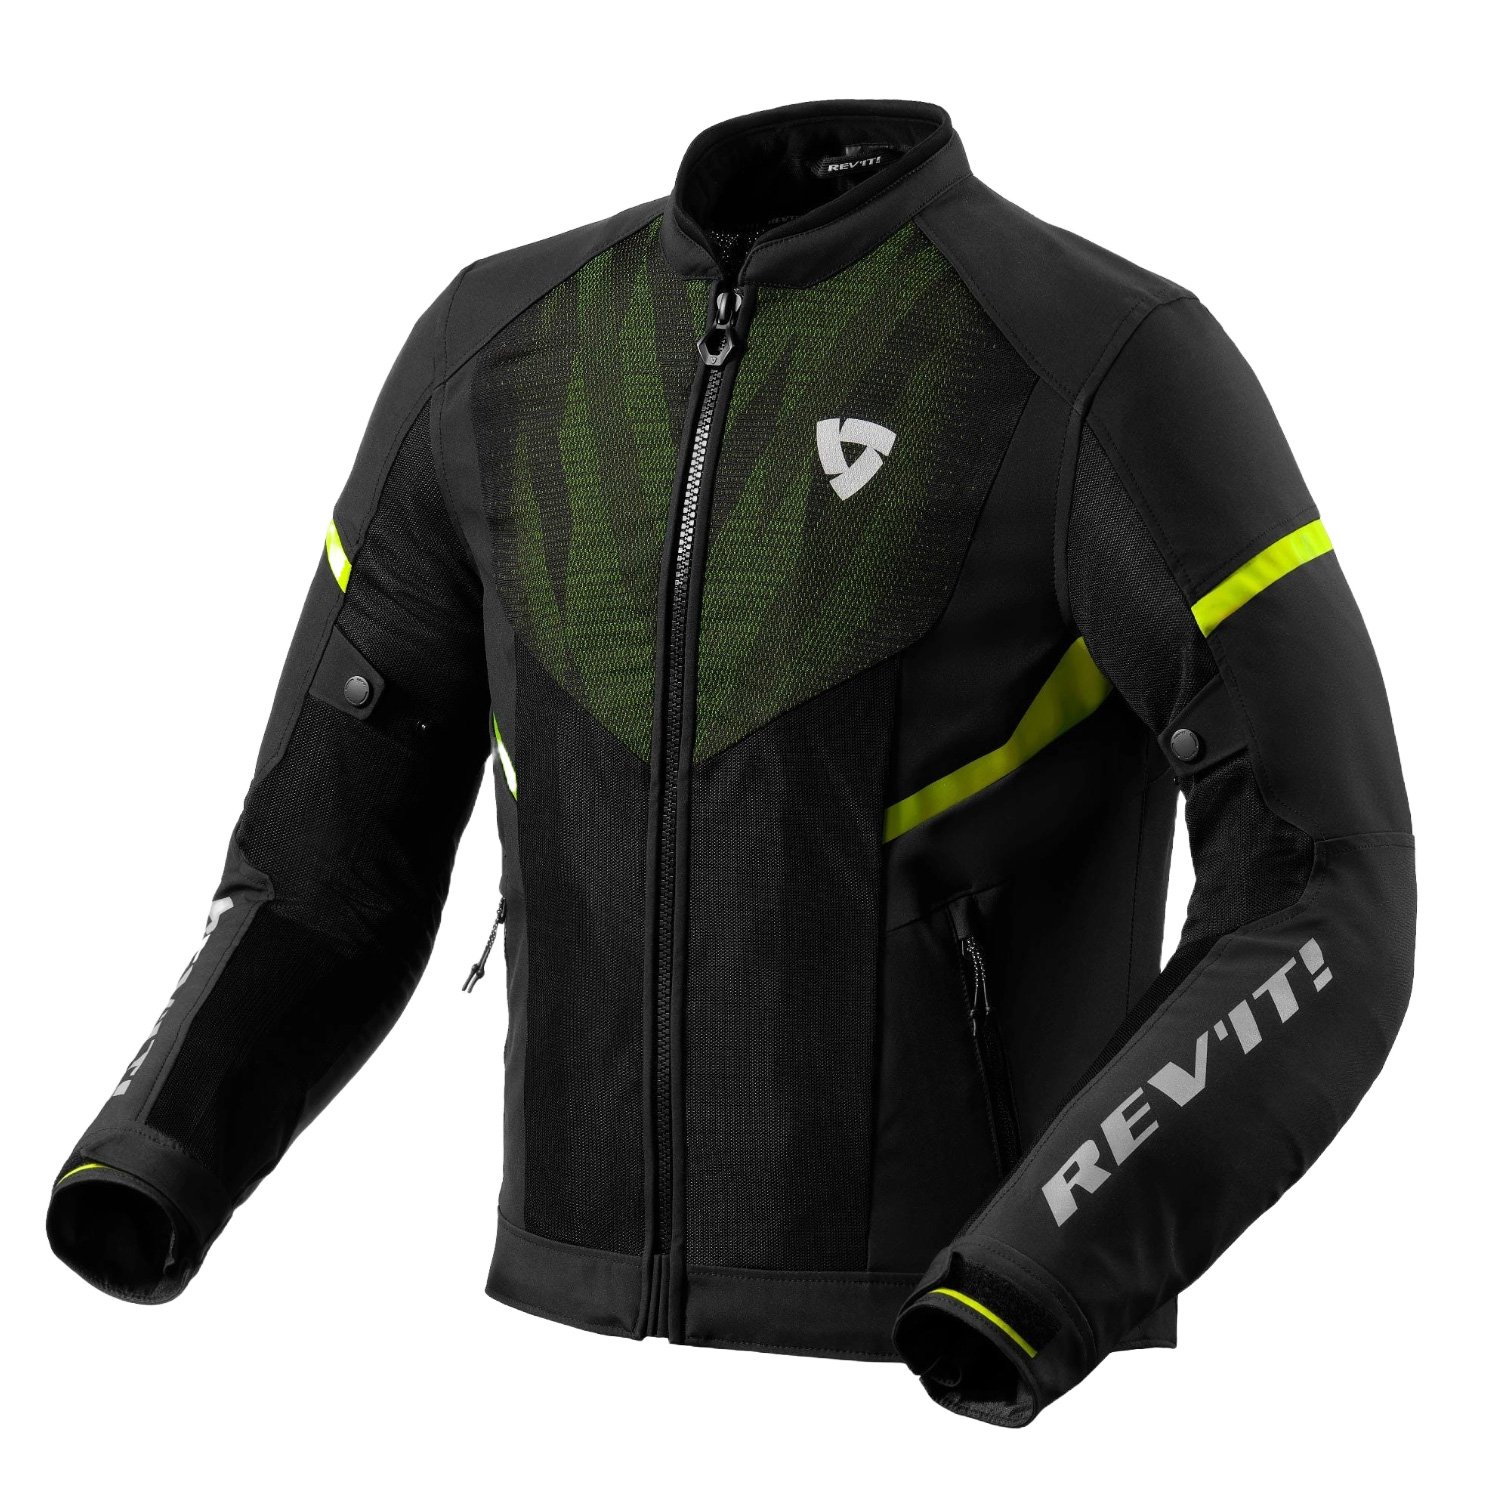 Image of REV'IT! Hyperspeed 2 GT Air Jacket Black Neon Yellow Size L ID 8700001367608